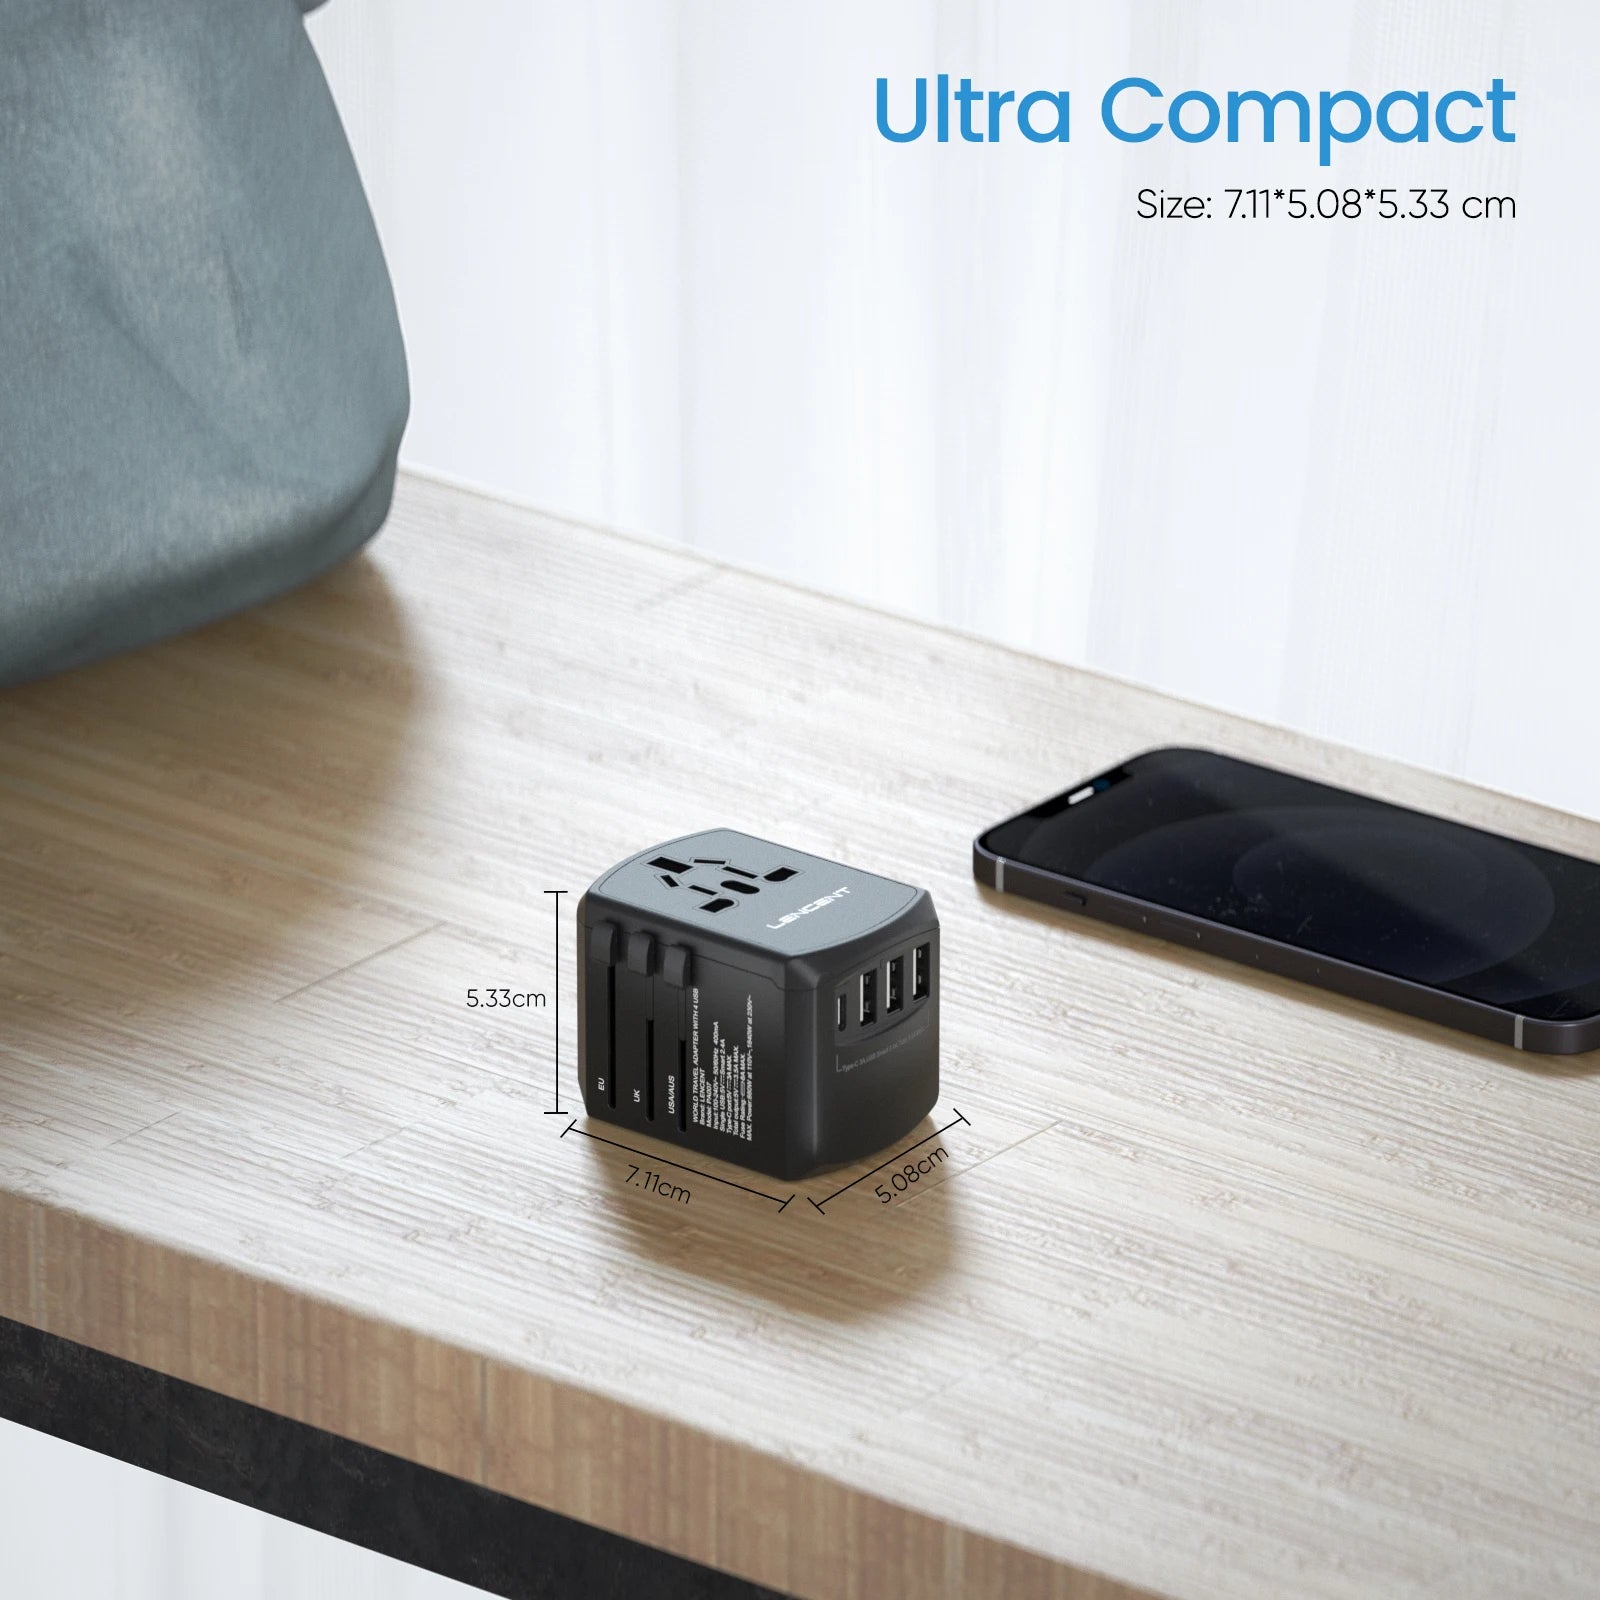 Universal Travel Adapter - Your All-in-One Charger